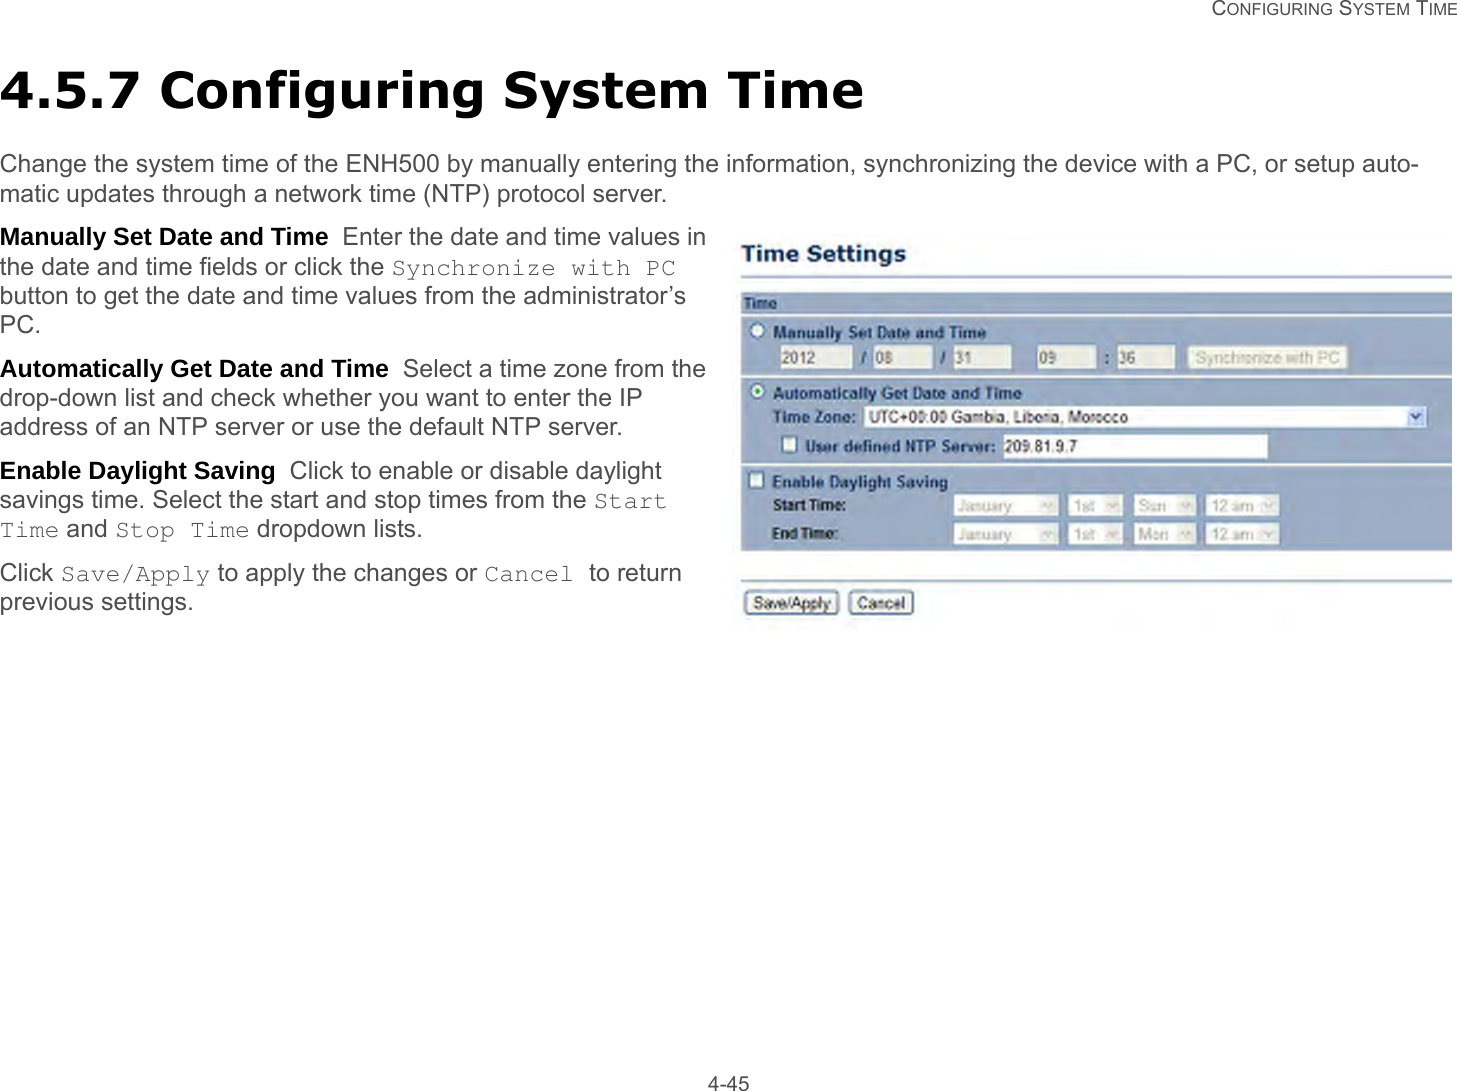   CONFIGURING SYSTEM TIME 4-454.5.7 Configuring System TimeChange the system time of the ENH500 by manually entering the information, synchronizing the device with a PC, or setup auto-matic updates through a network time (NTP) protocol server.Manually Set Date and Time  Enter the date and time values in the date and time fields or click the Synchronize with PC button to get the date and time values from the administrator’s PC.Automatically Get Date and Time  Select a time zone from the drop-down list and check whether you want to enter the IP address of an NTP server or use the default NTP server.Enable Daylight Saving  Click to enable or disable daylight savings time. Select the start and stop times from the Start Time and Stop Time dropdown lists.Click Save/Apply to apply the changes or Cancel to return previous settings.